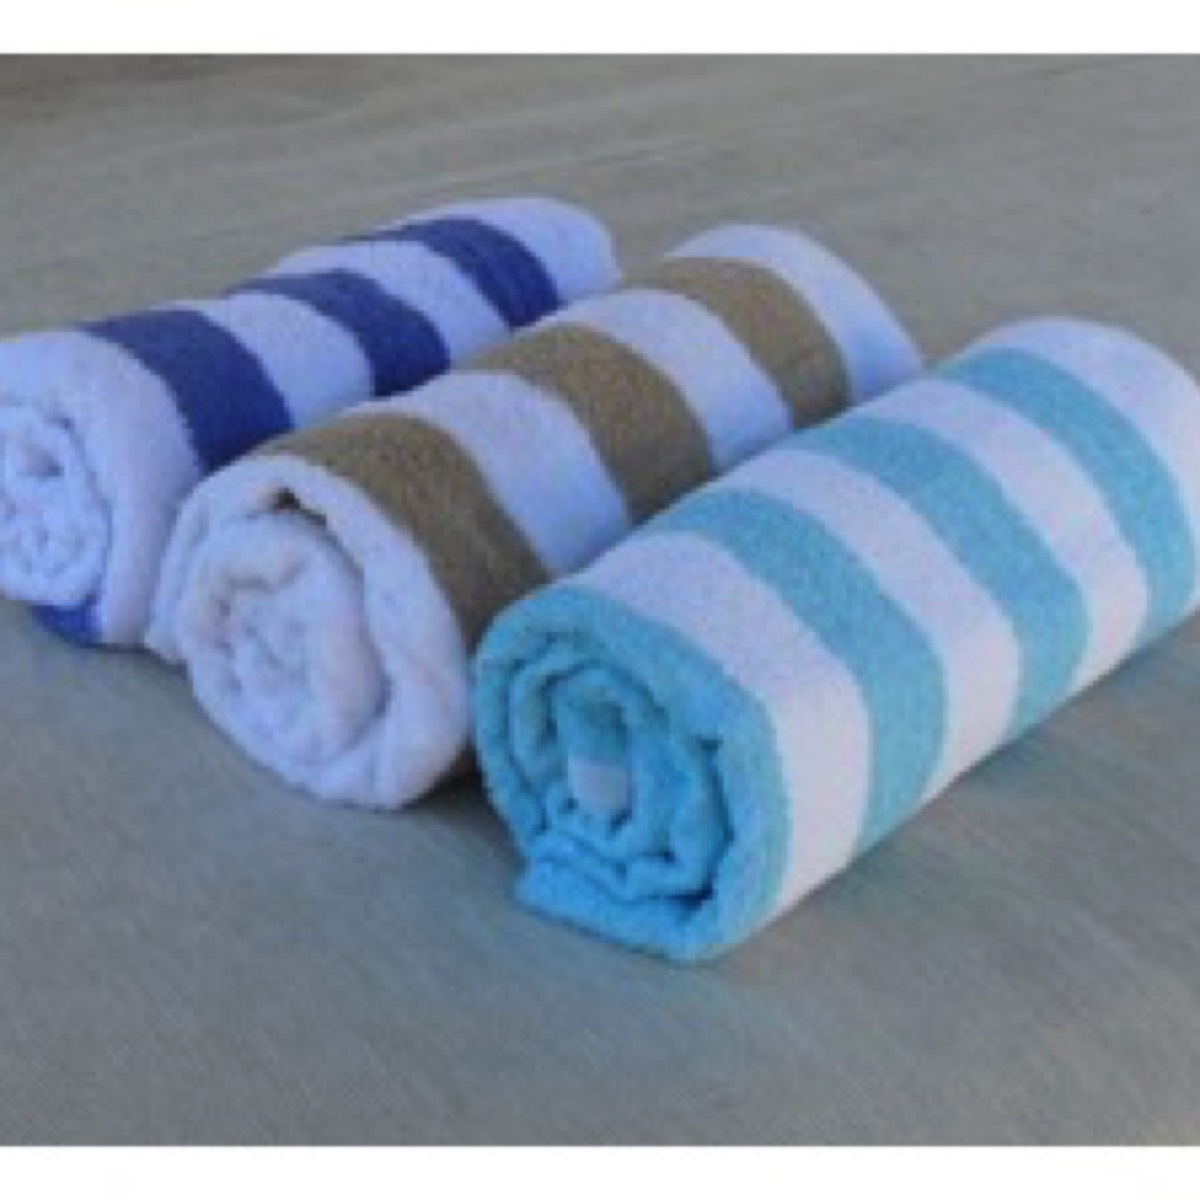 Budget Beach Towels from Blue Swimmer Towels